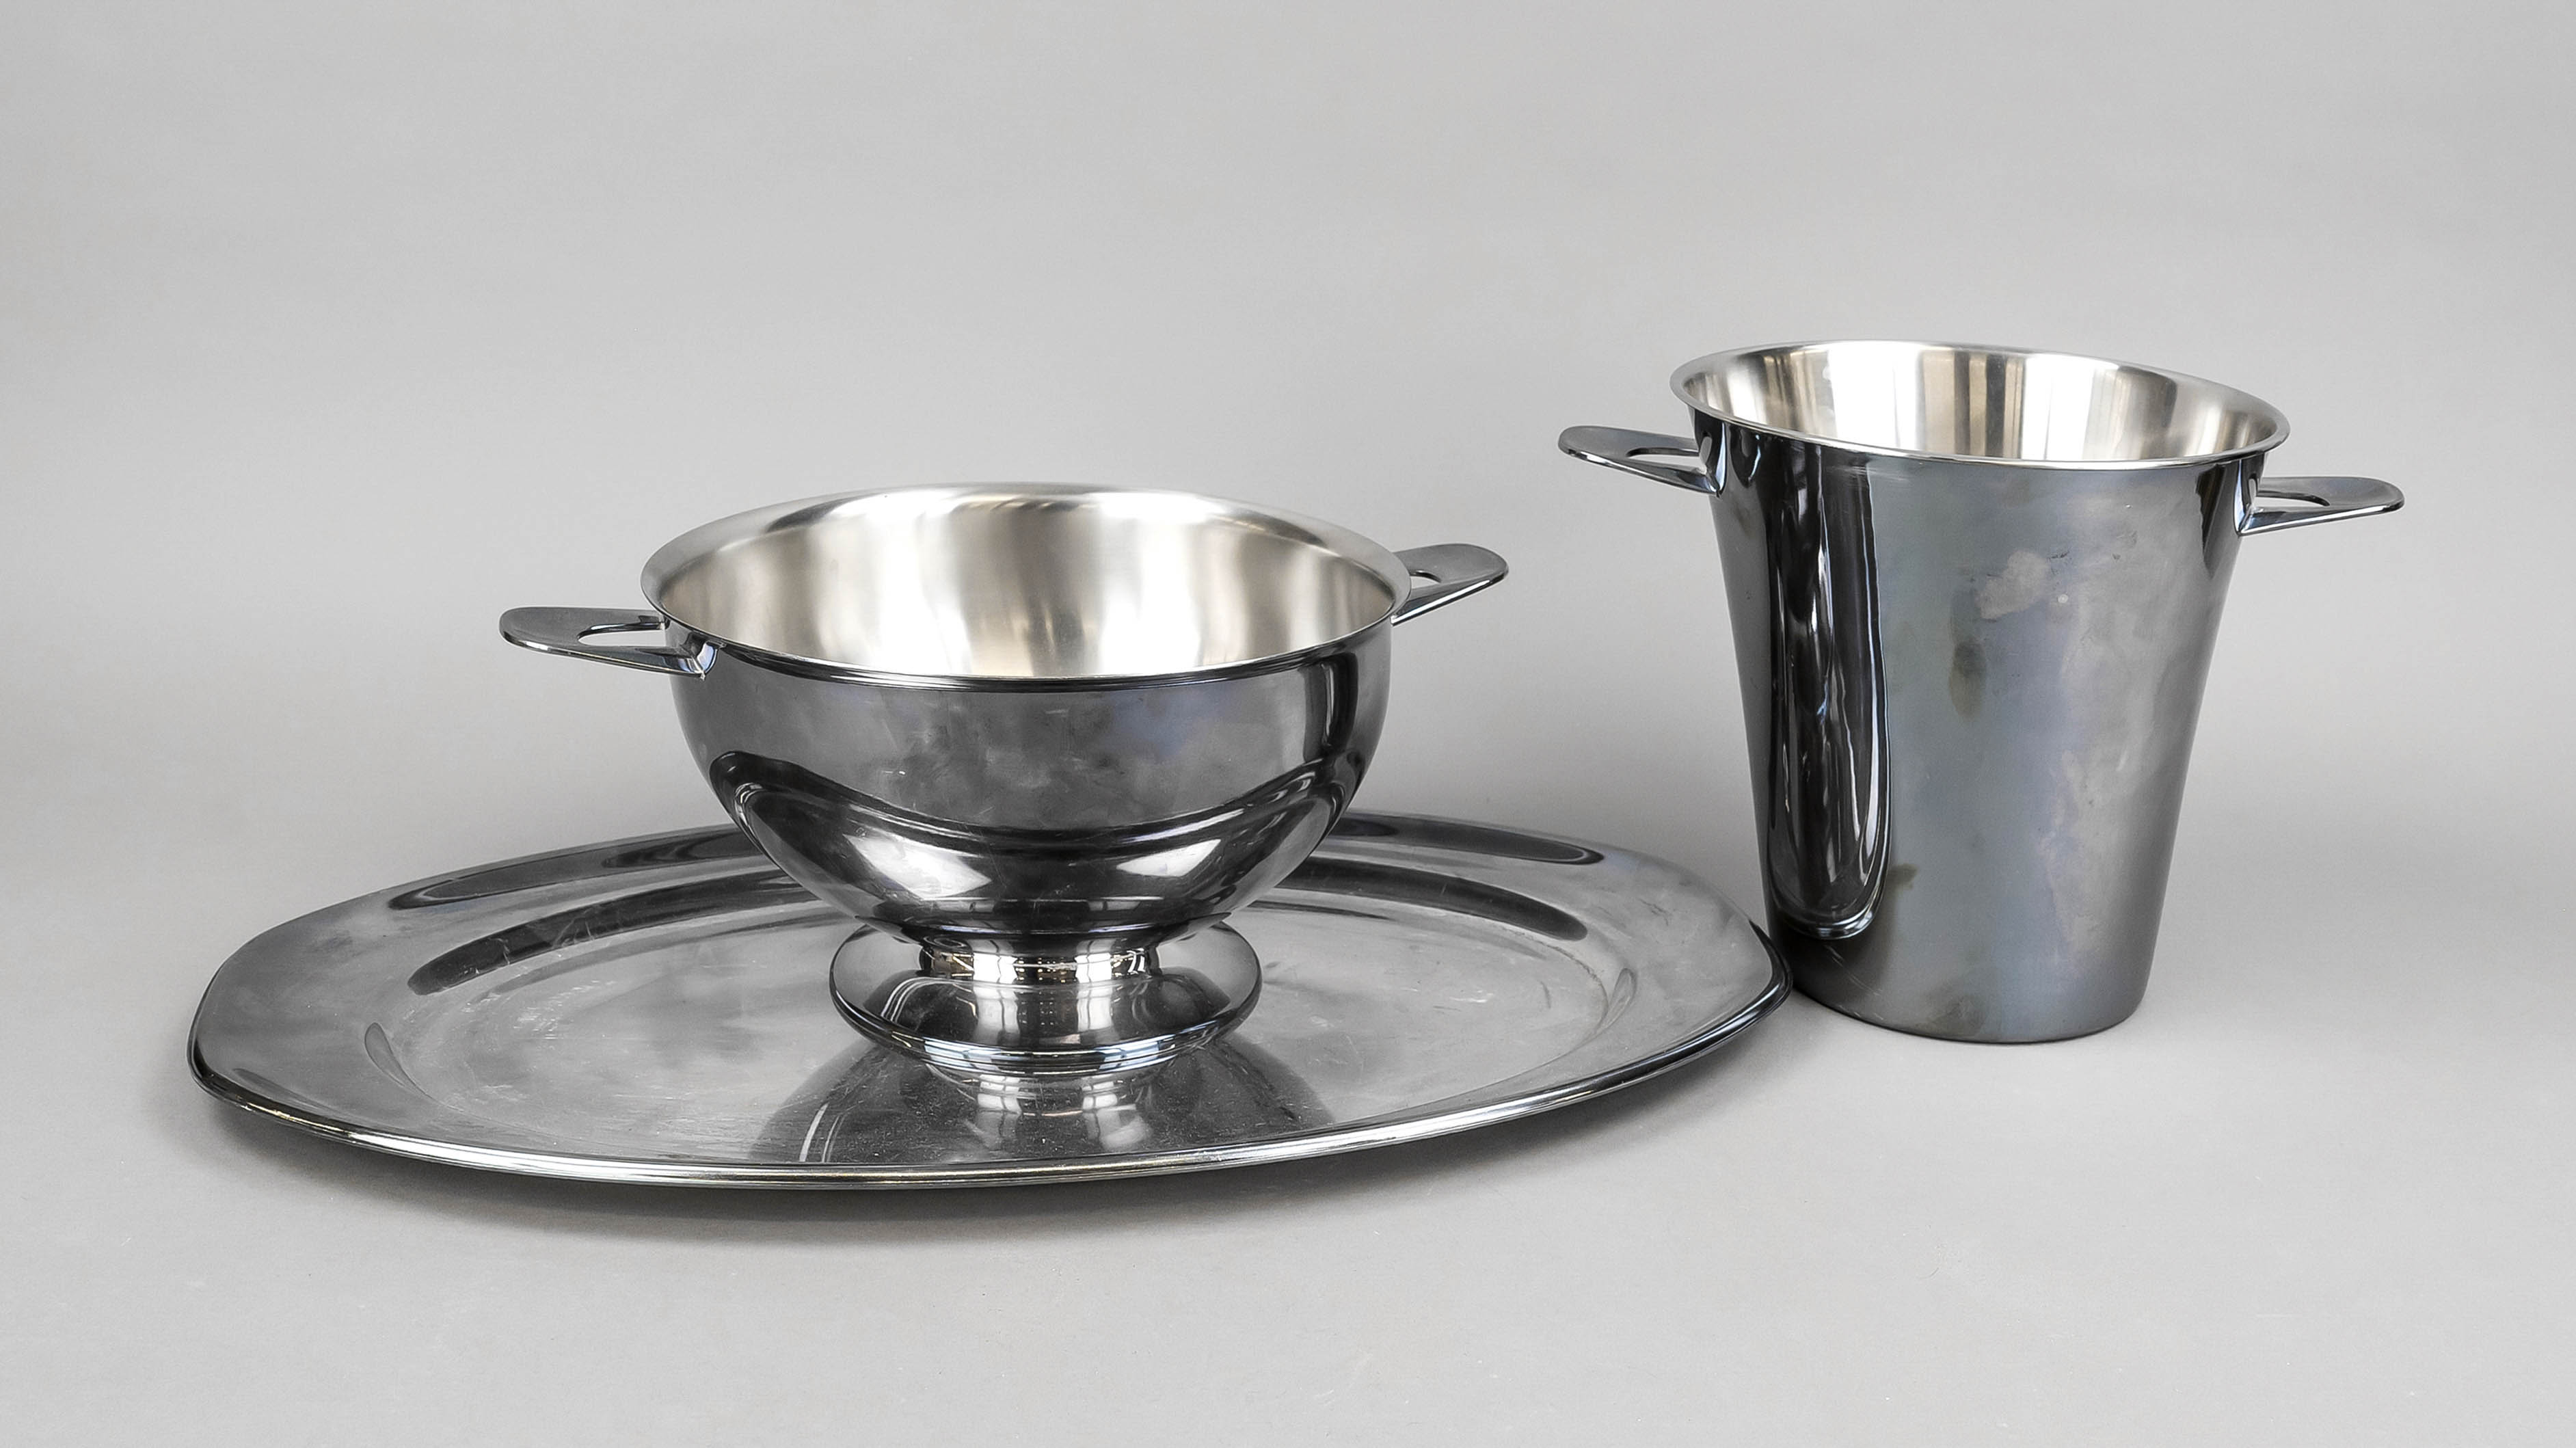 WMF set, Germany 20th century, stainless steel. Consisting of champagne cooler, cooling bowl for